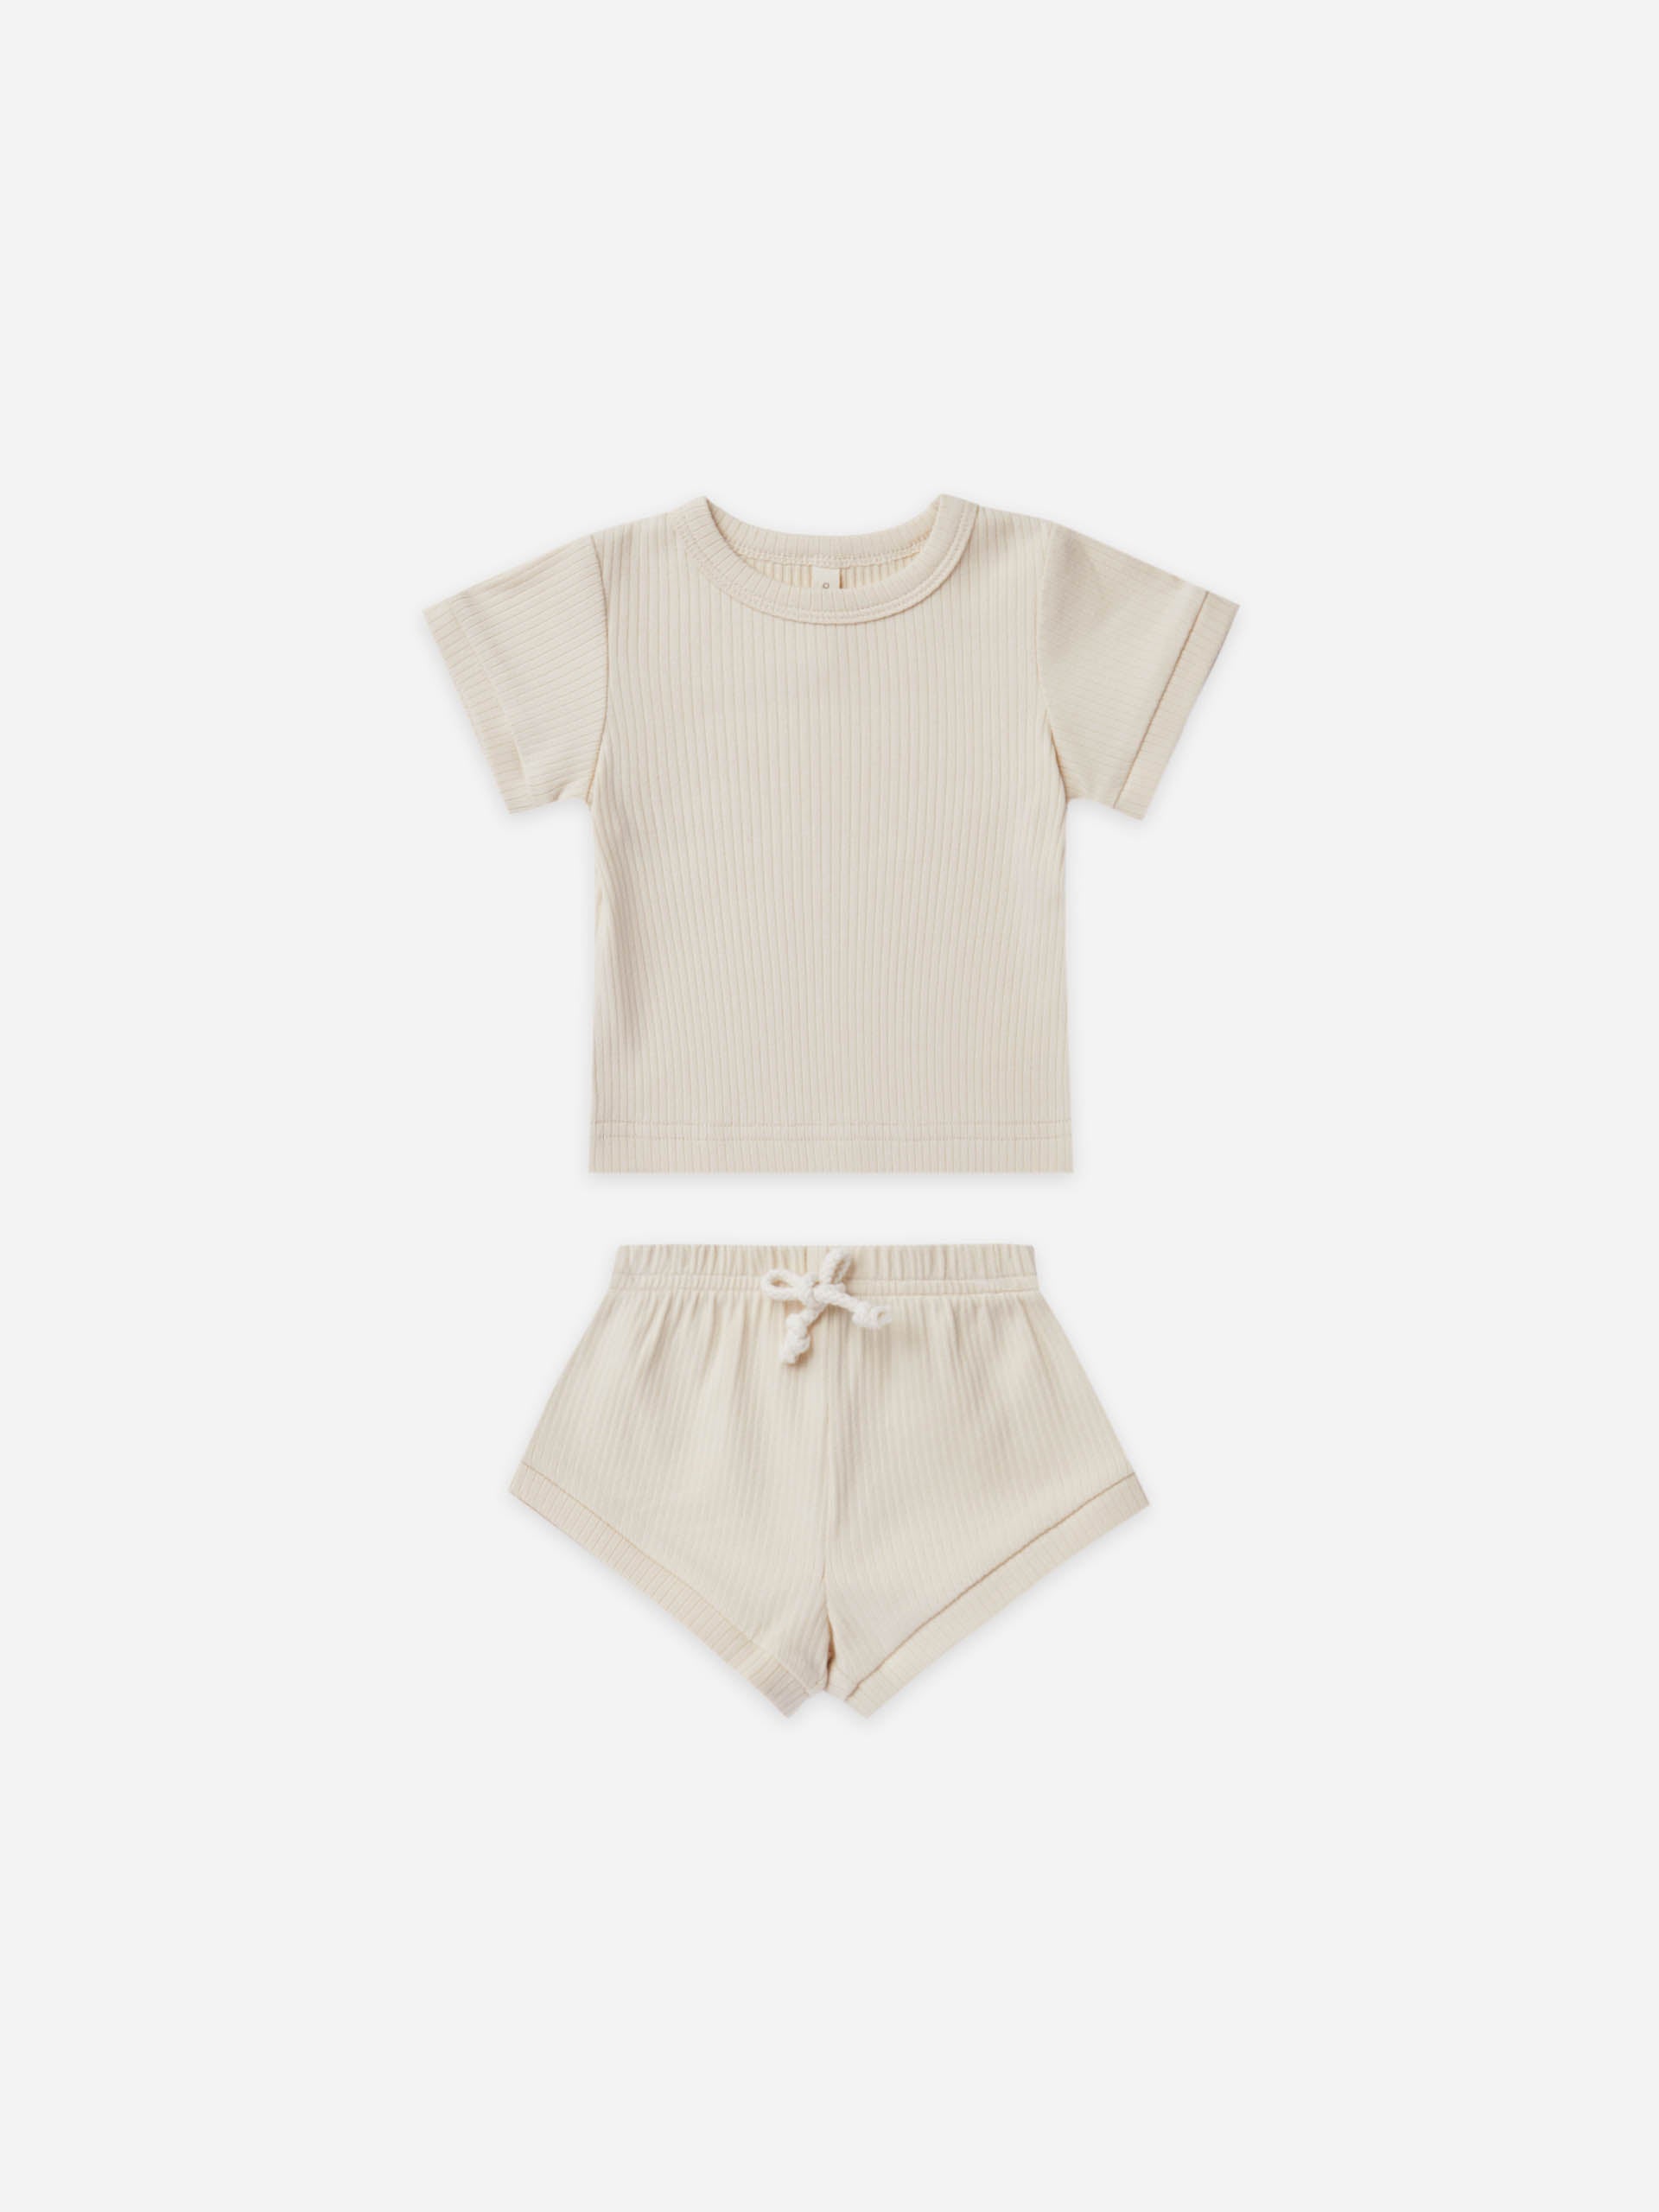 RIBBED SHORTIE SET | NATURAL - LAST ONE 18/24M